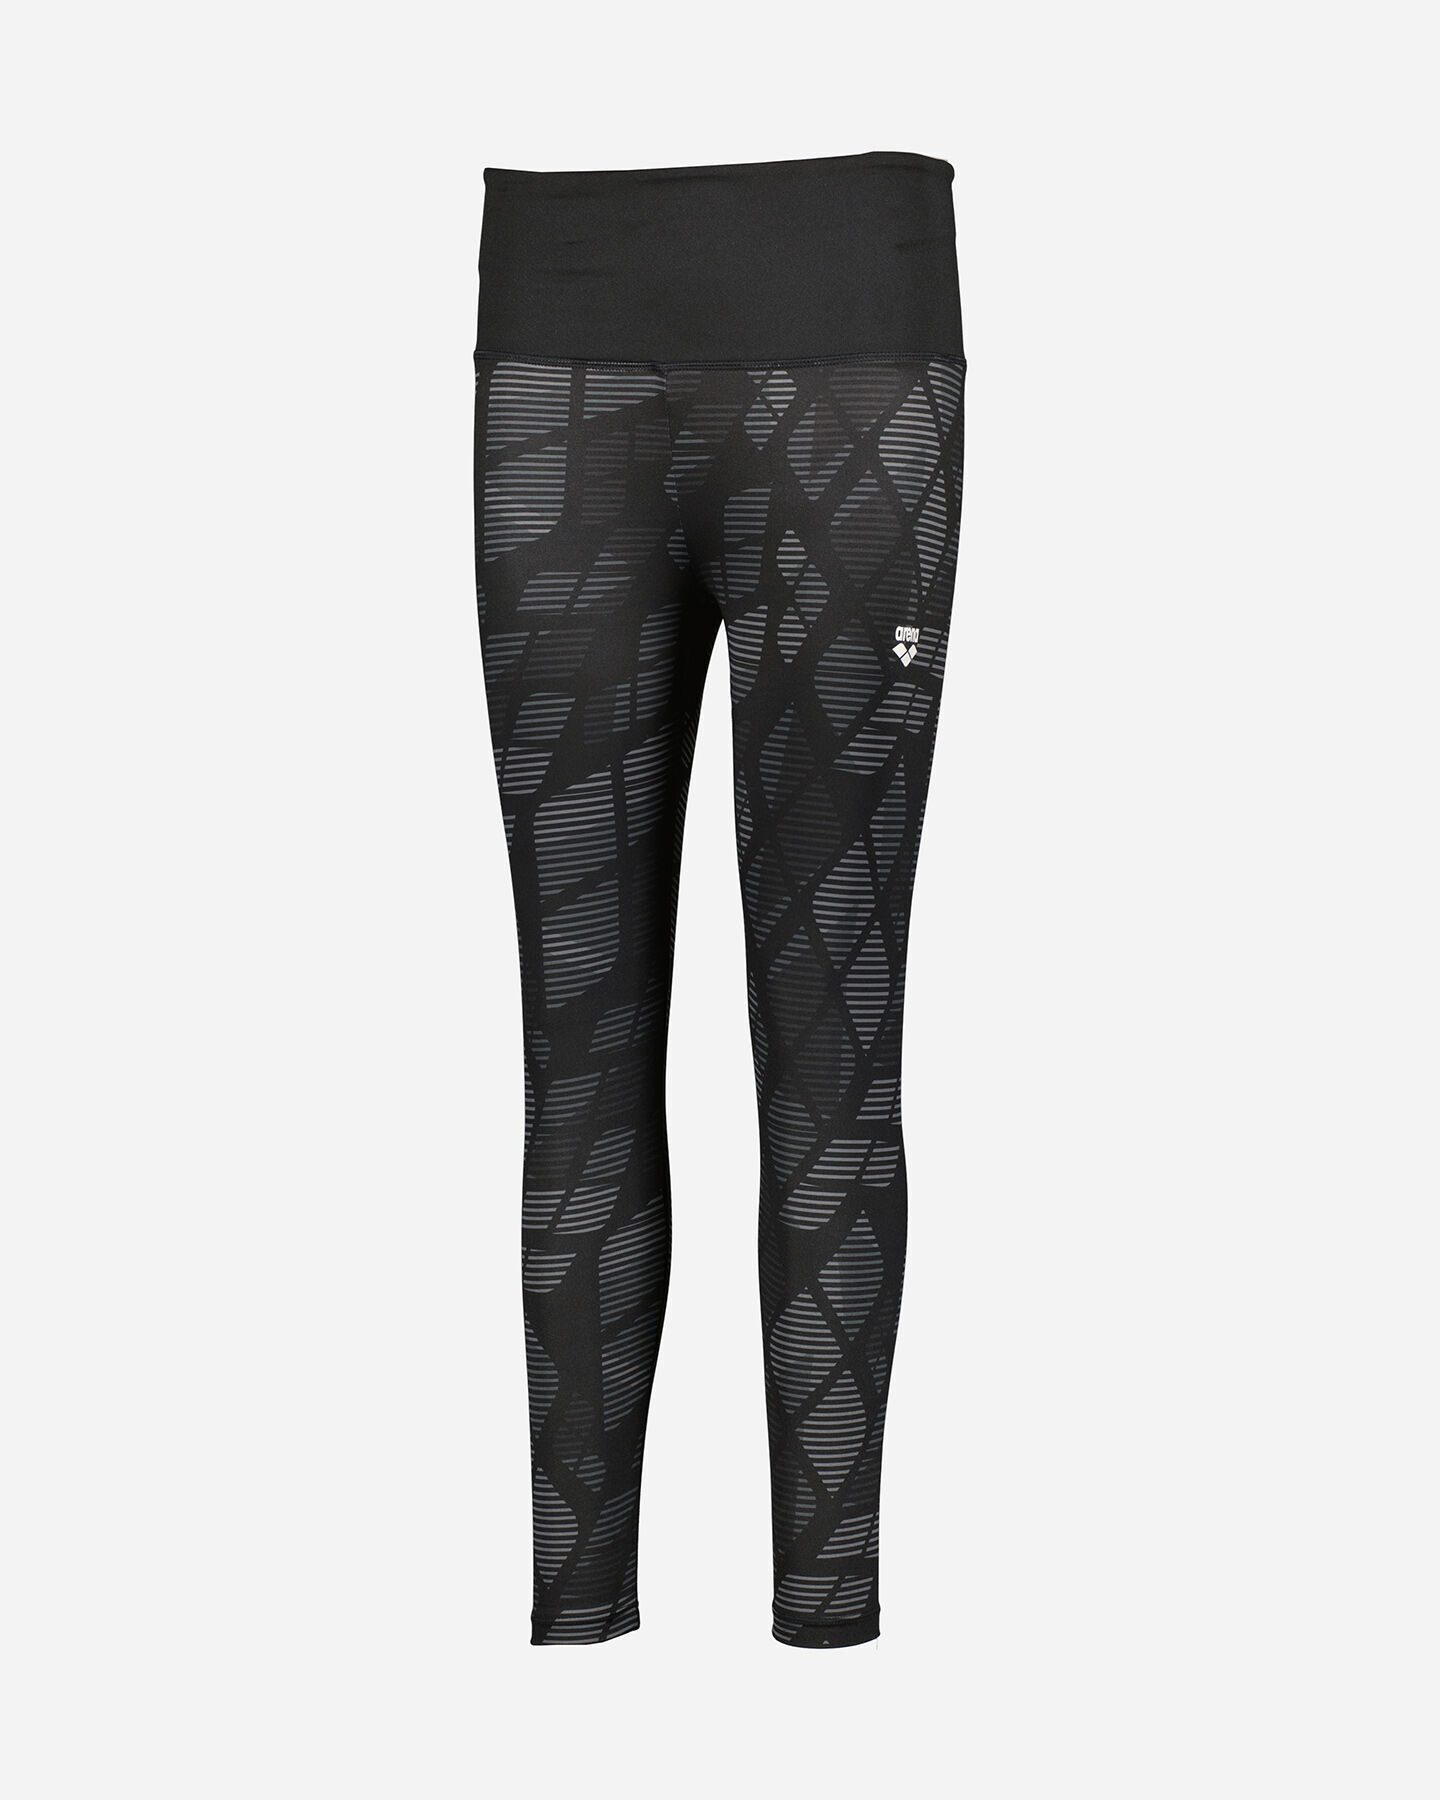  Leggings ARENA POLY AOP W S4093747|AOP|XS scatto 4